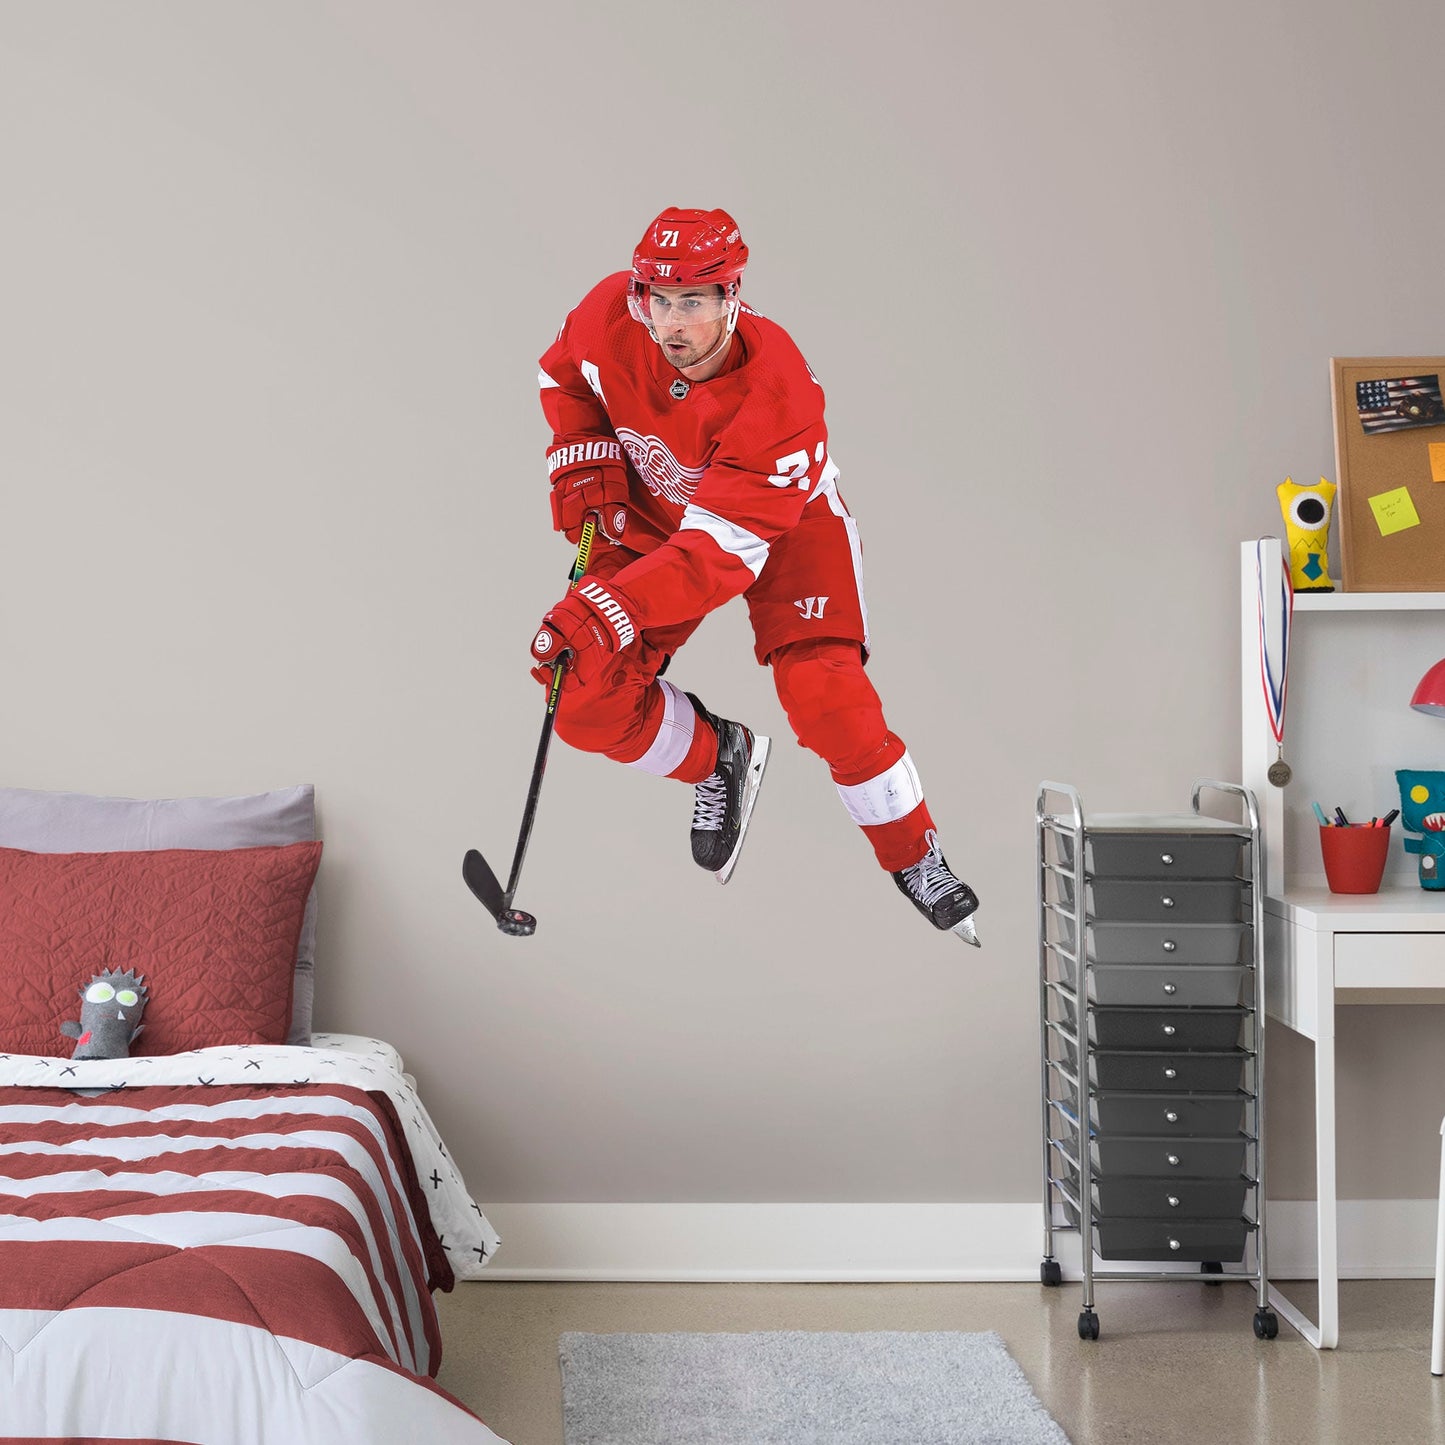 Giant Athlete + 2 Decals (35"W x 50"H) From the University of Michigan to the Detroit Red Wings, Dylan Larkin has been a fan favorite for years, and now you can bring him to life in your own home. Larkin leads on the ice and is sure to bring that excitement to your bedroom, fan room, or office, it's almost as good as being at Little Caesars Arena!